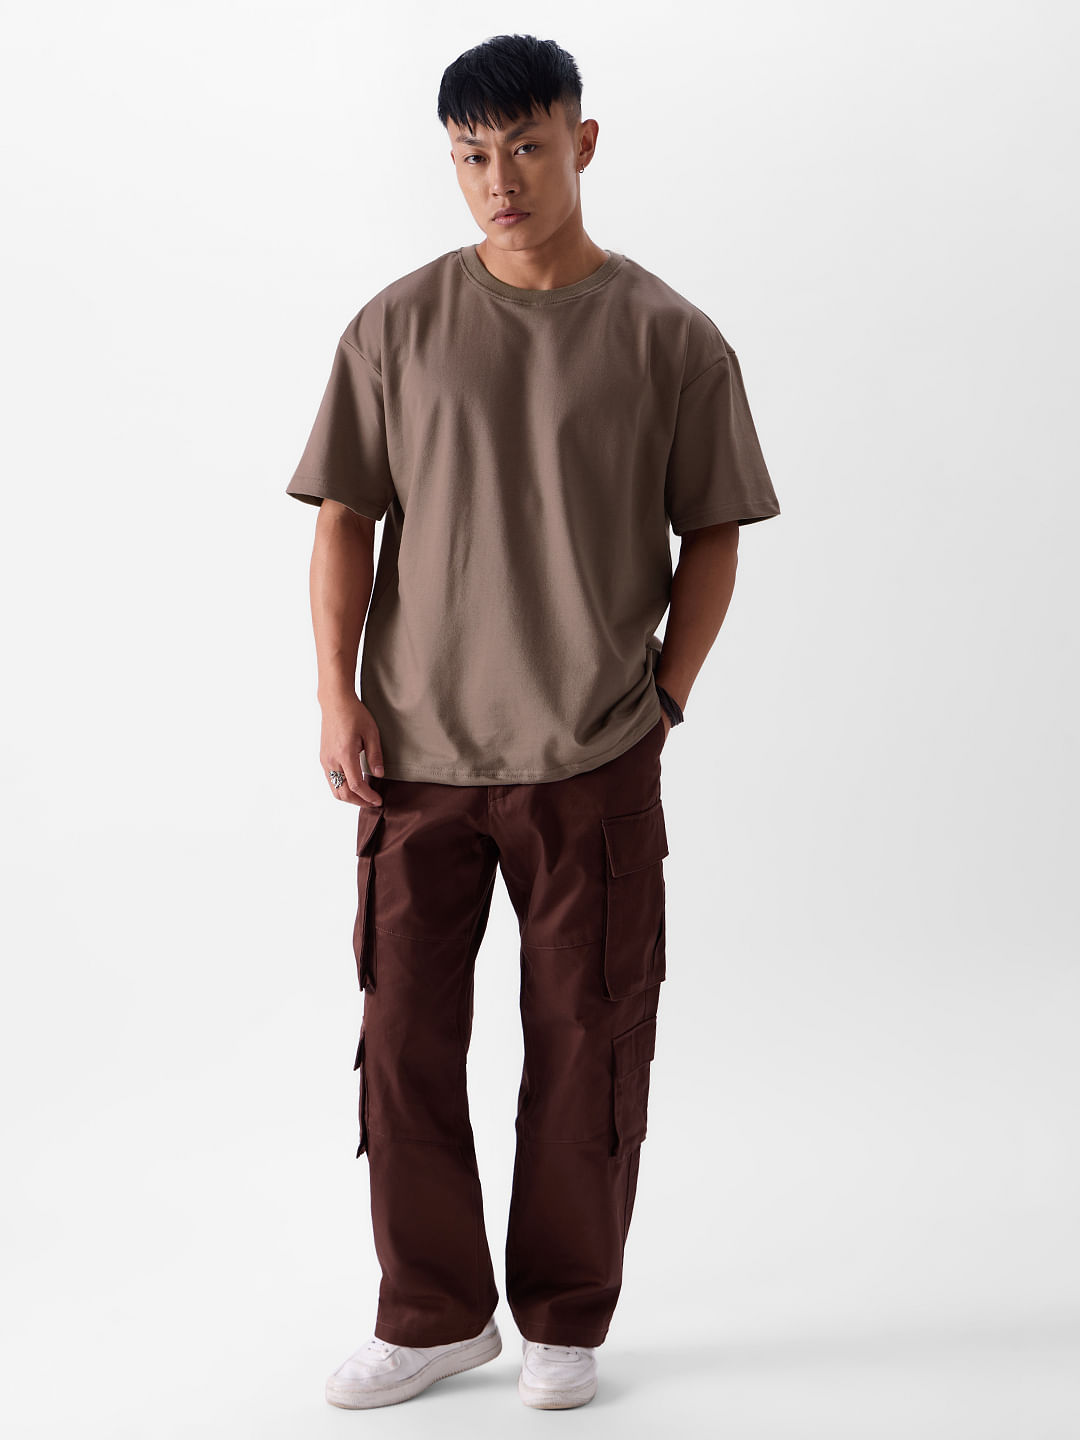 Shop for Solids: Brown Sugar Oversized T-Shirts Online